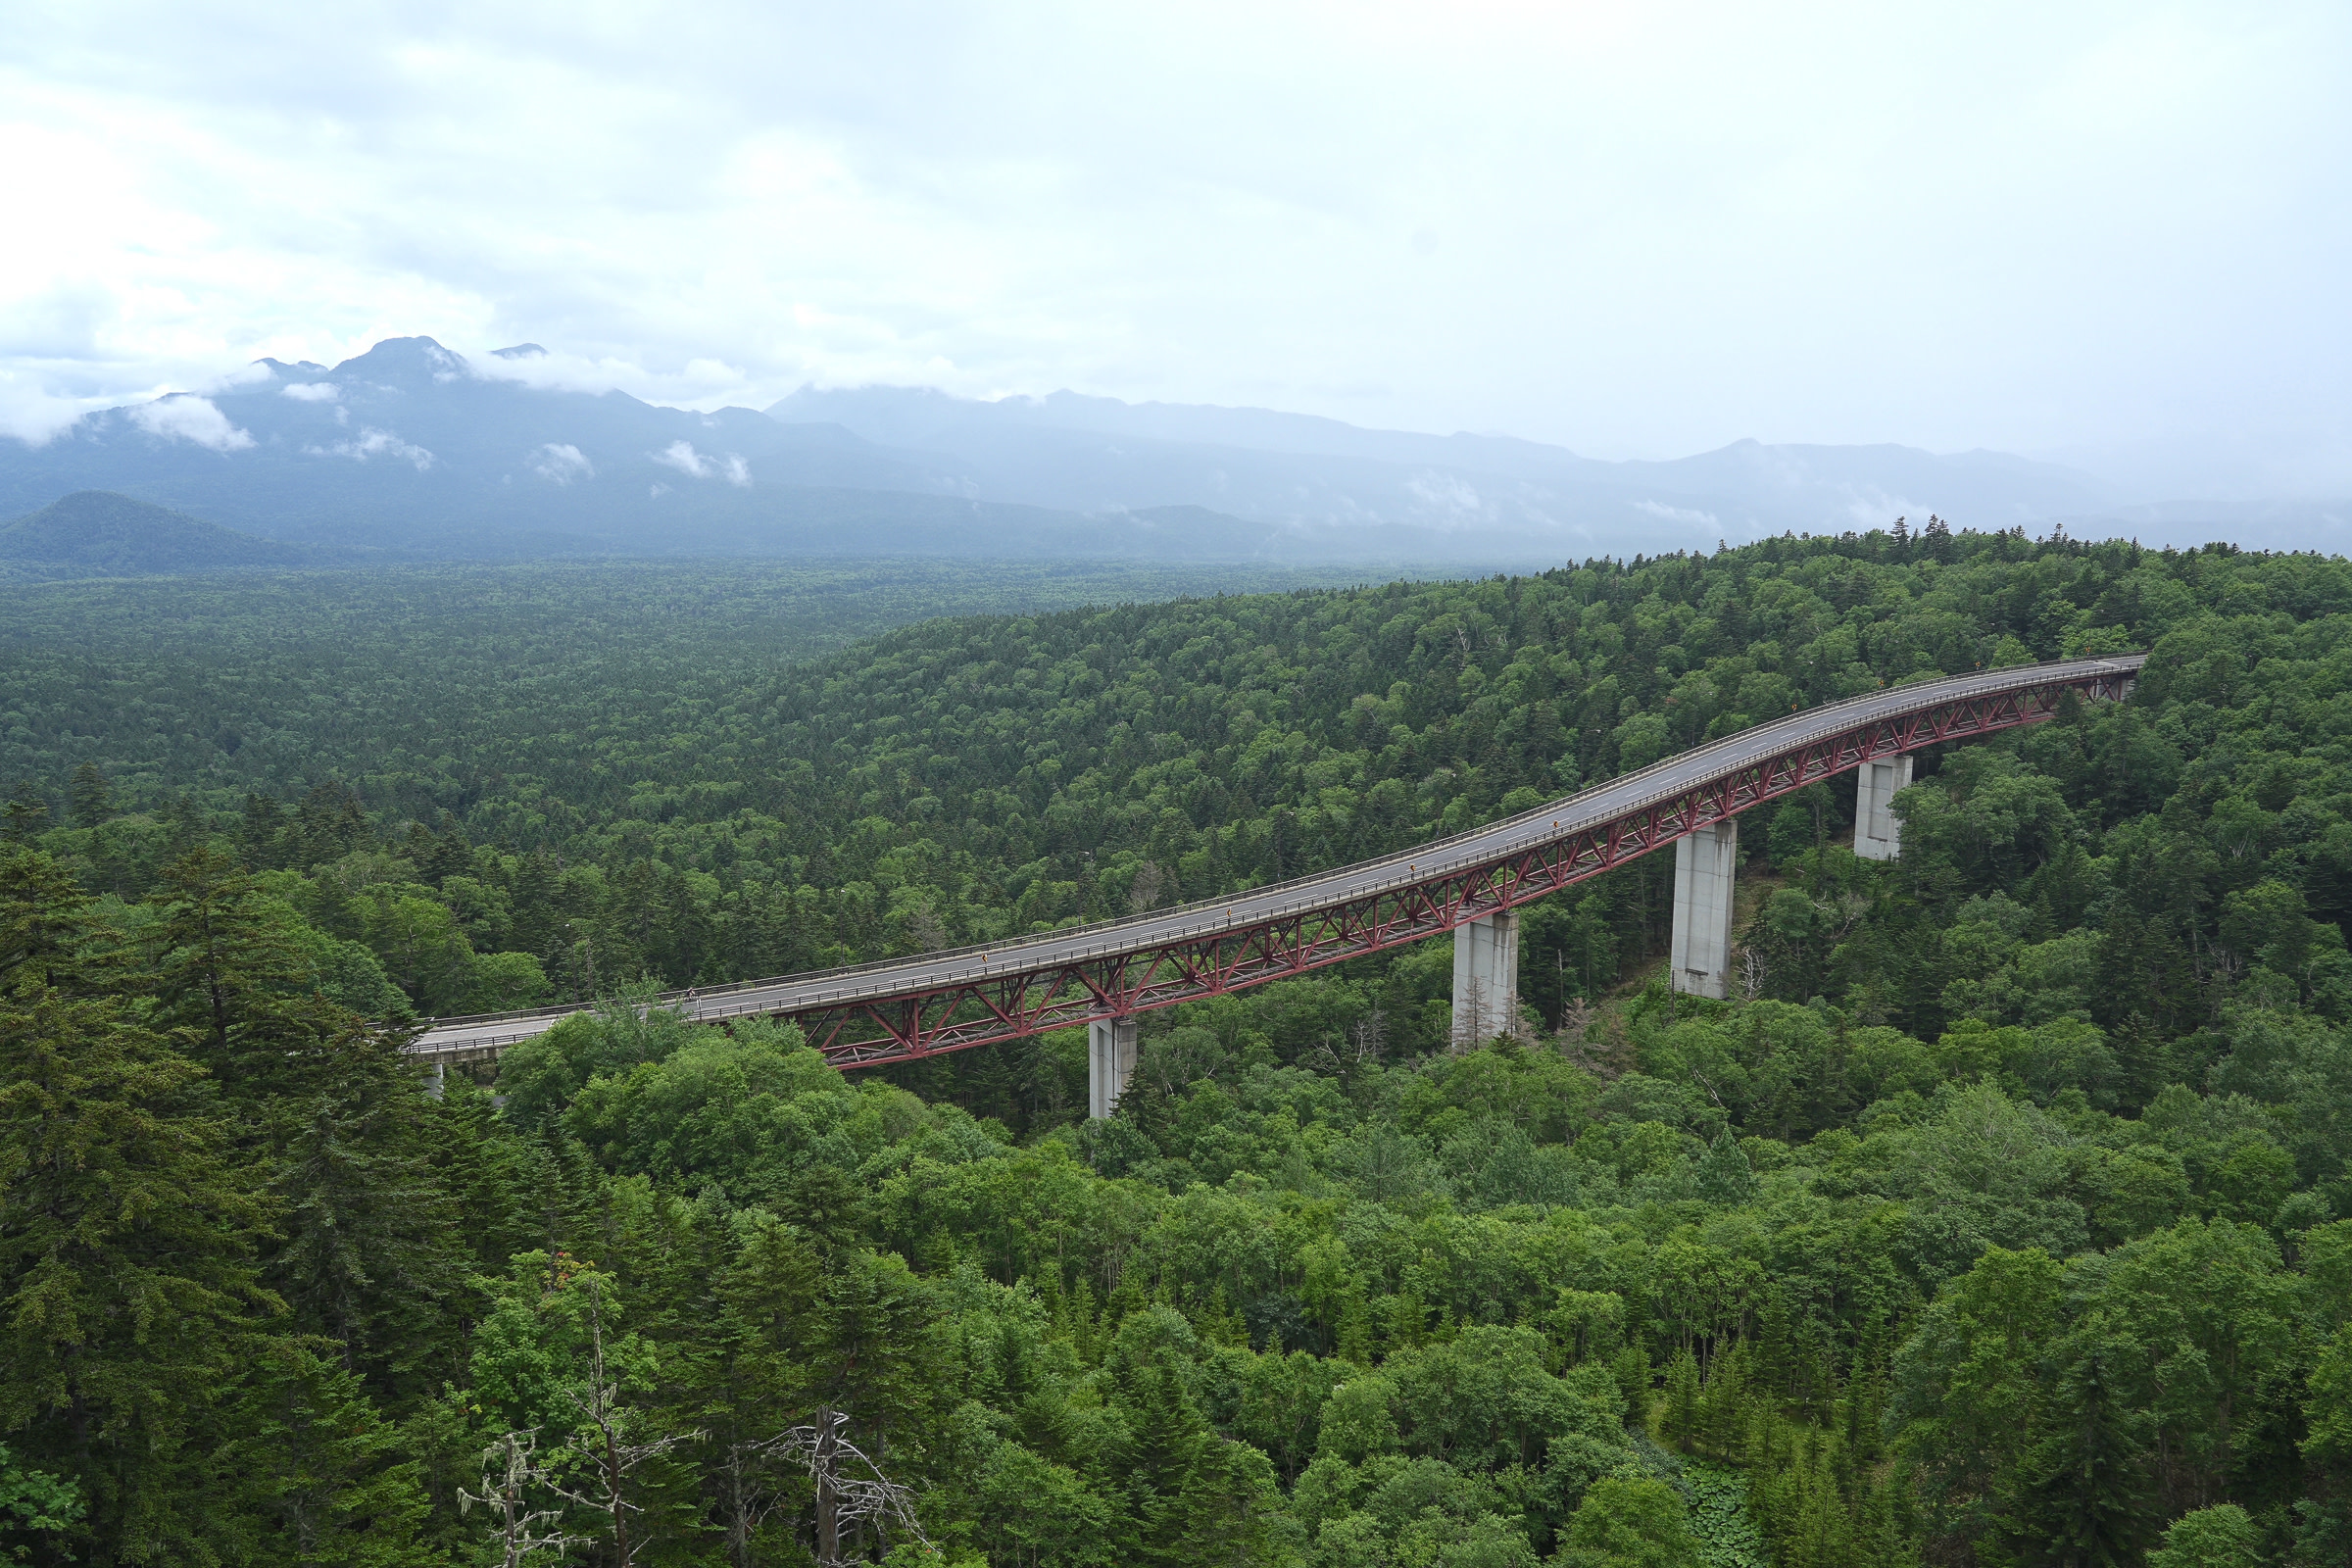 Mikuni Pass viaduct road in the middle of green forests with the Daisetsuzan mountains on the backdrop.